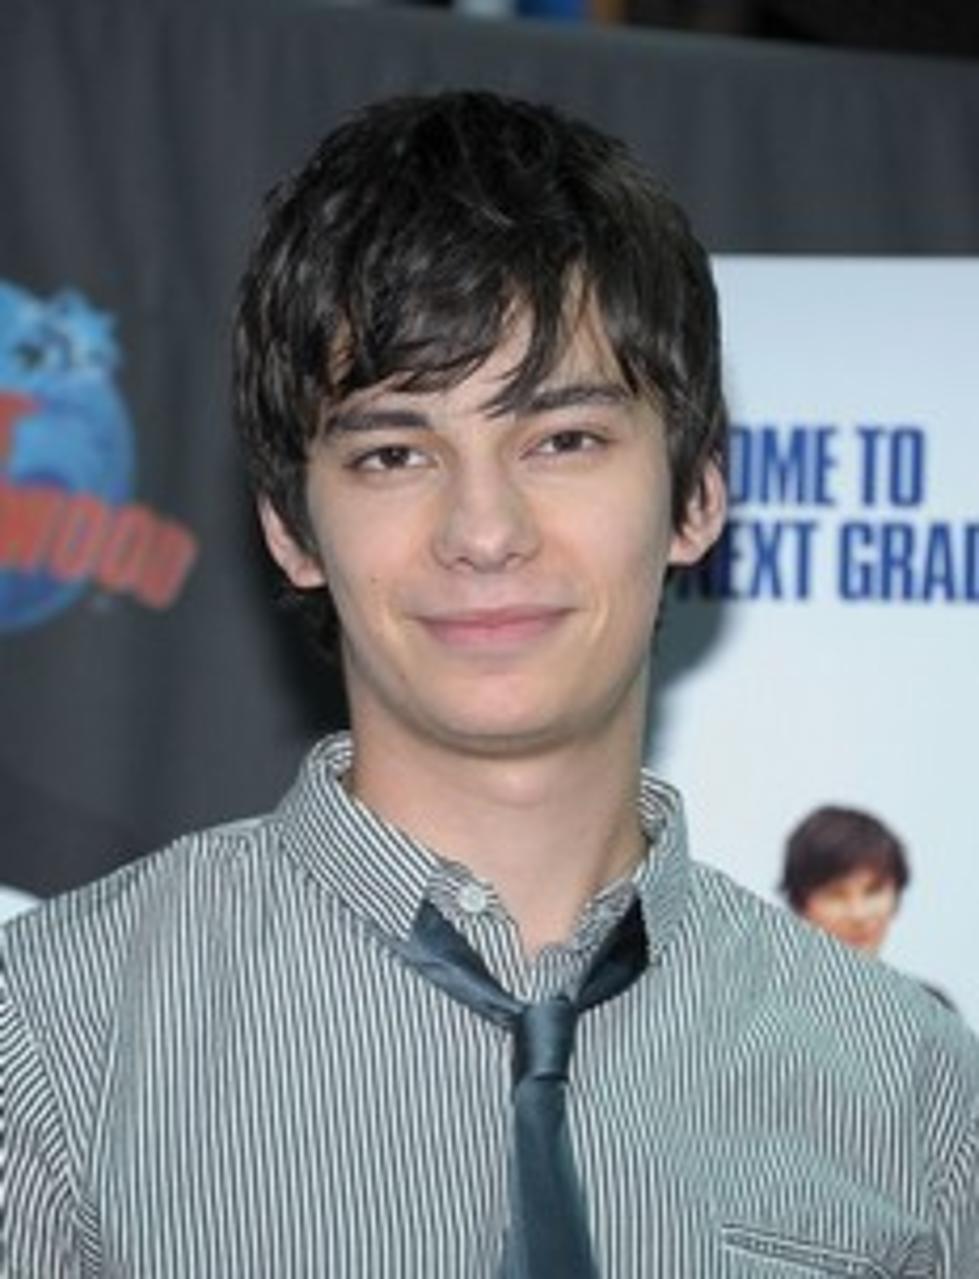 Devon Bostick From “Diary of A Wimpy Kid”